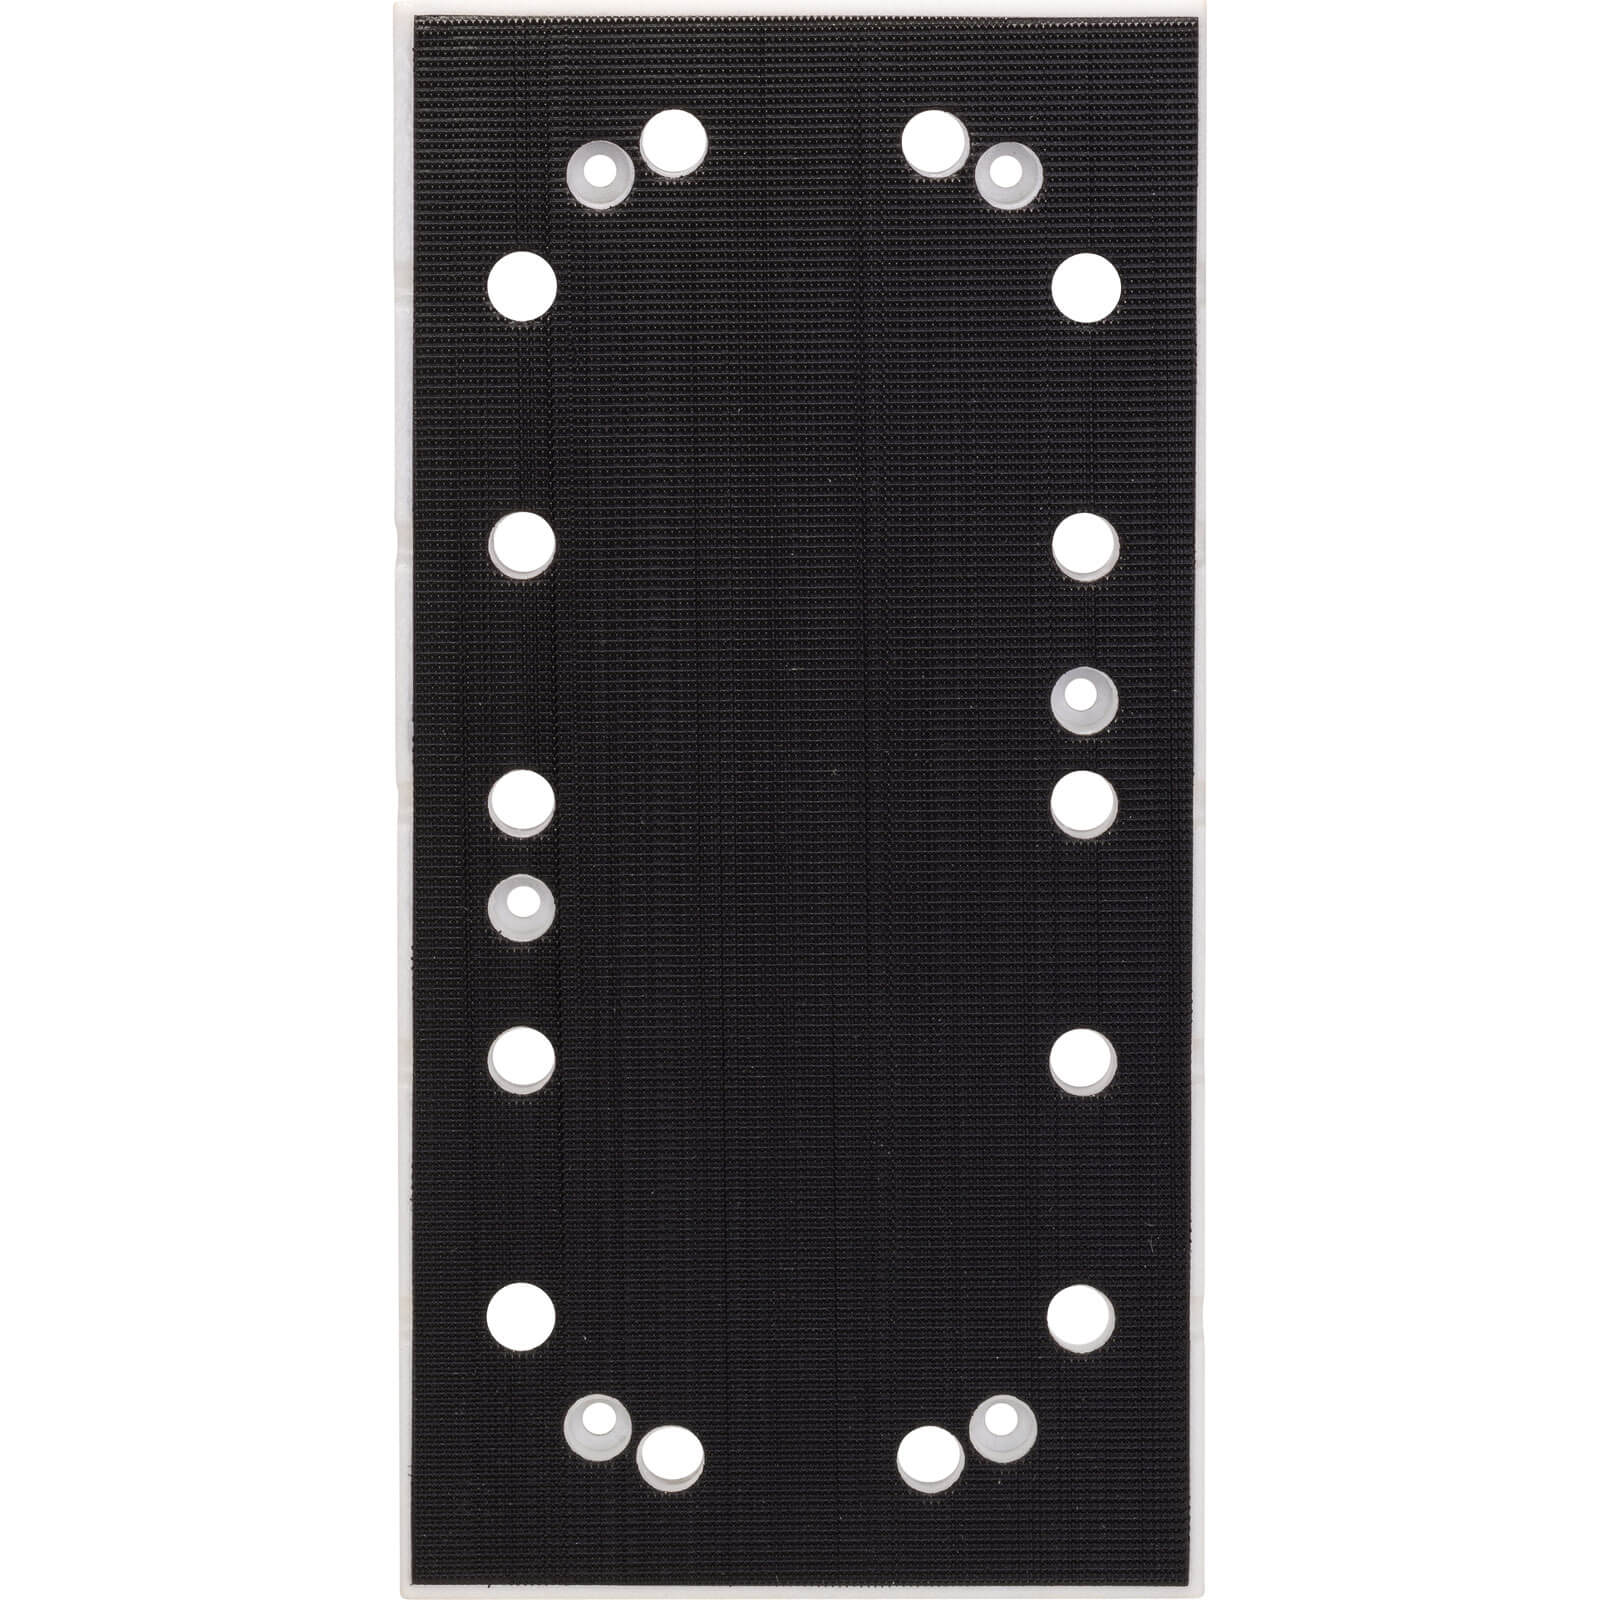 Photo of Bosch Gss 280 A/ae Backing Pad